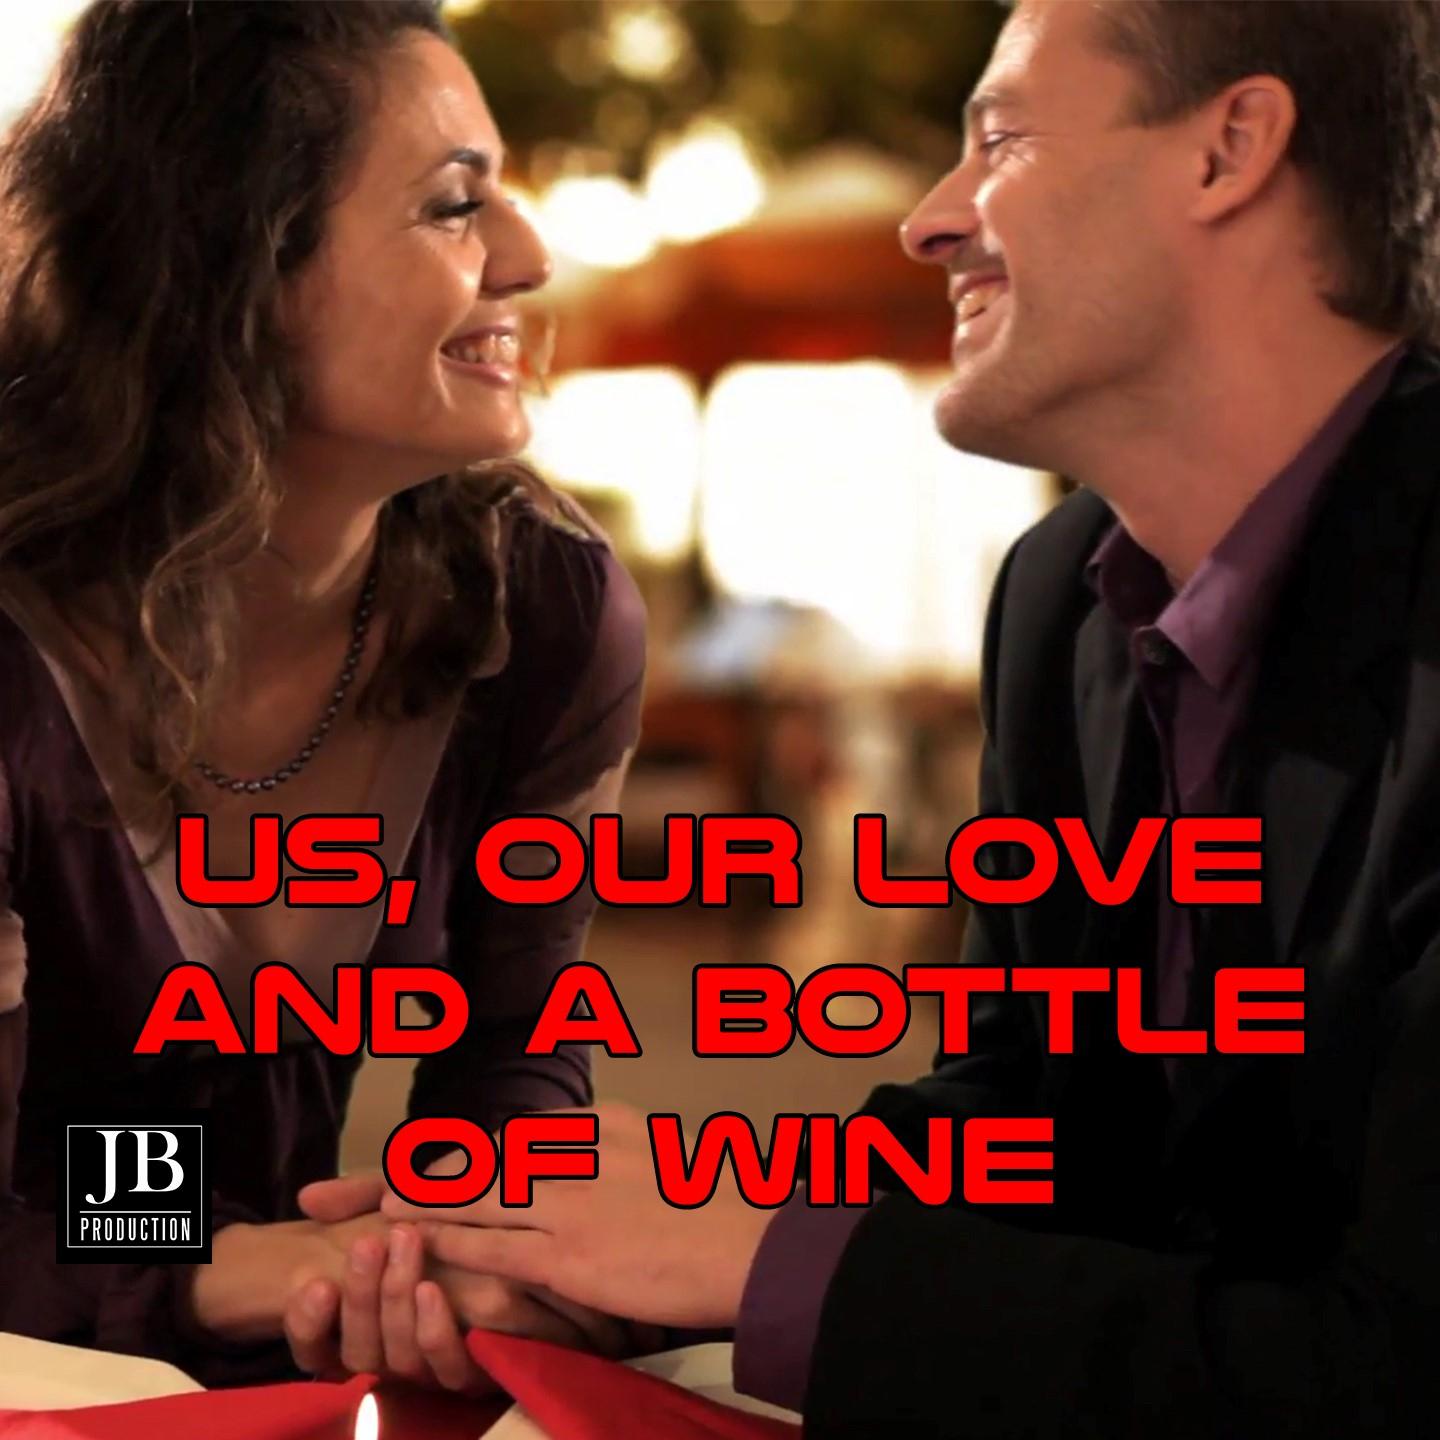 Us, Our Love And a Bottle of Wine